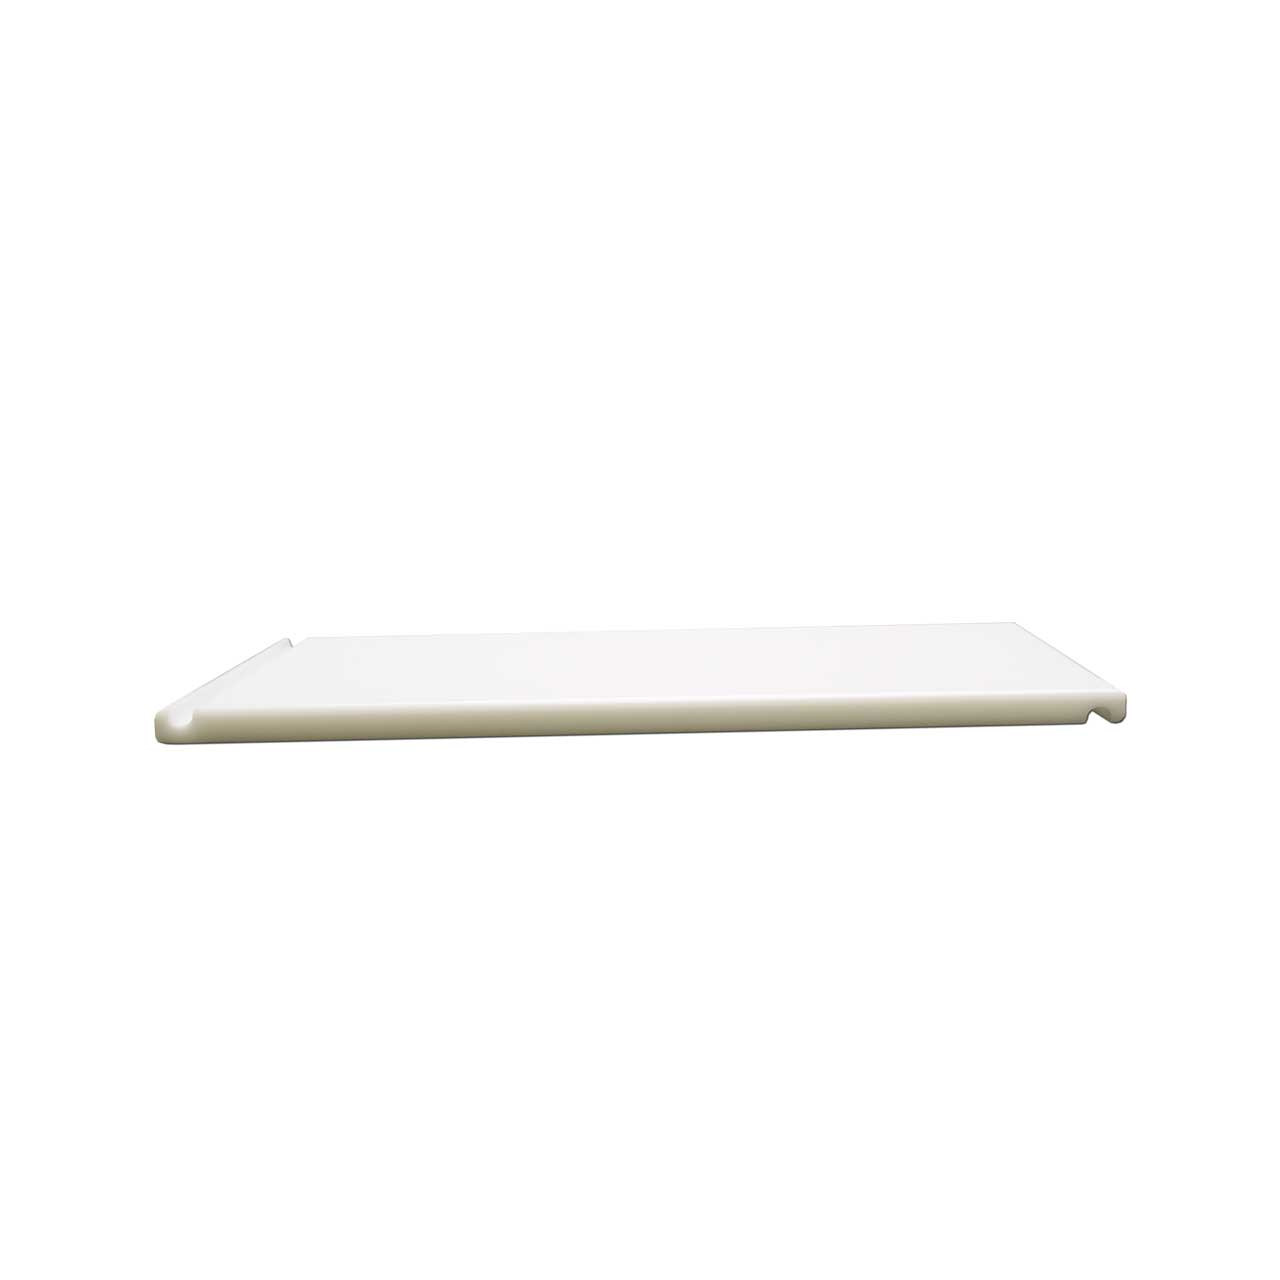 Pull Out White Cutting Board - 3/4 Inch Thick - Cutting Board